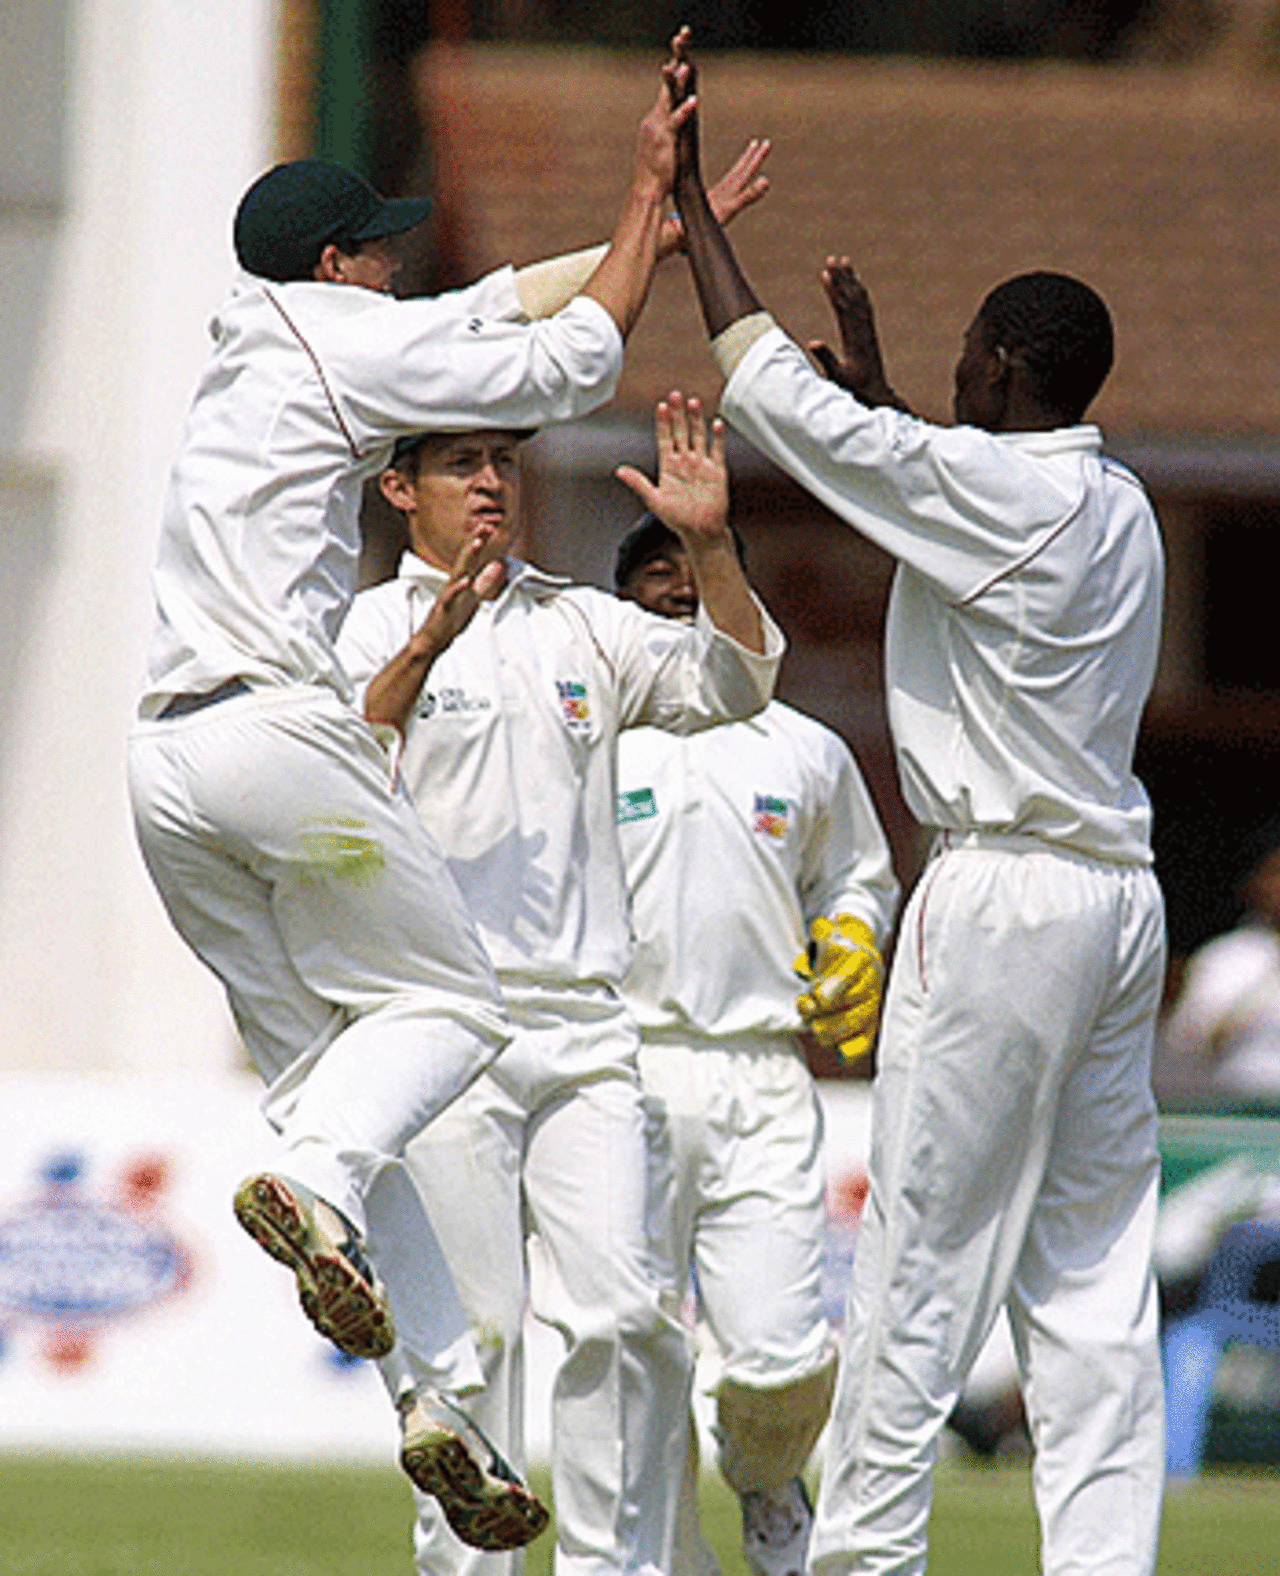 Chris Mpofu celebrates with his teammates the wicket of Hamish Marshall, Zimbabwe v New Zealand, first Test, Harare, August 8, 2005